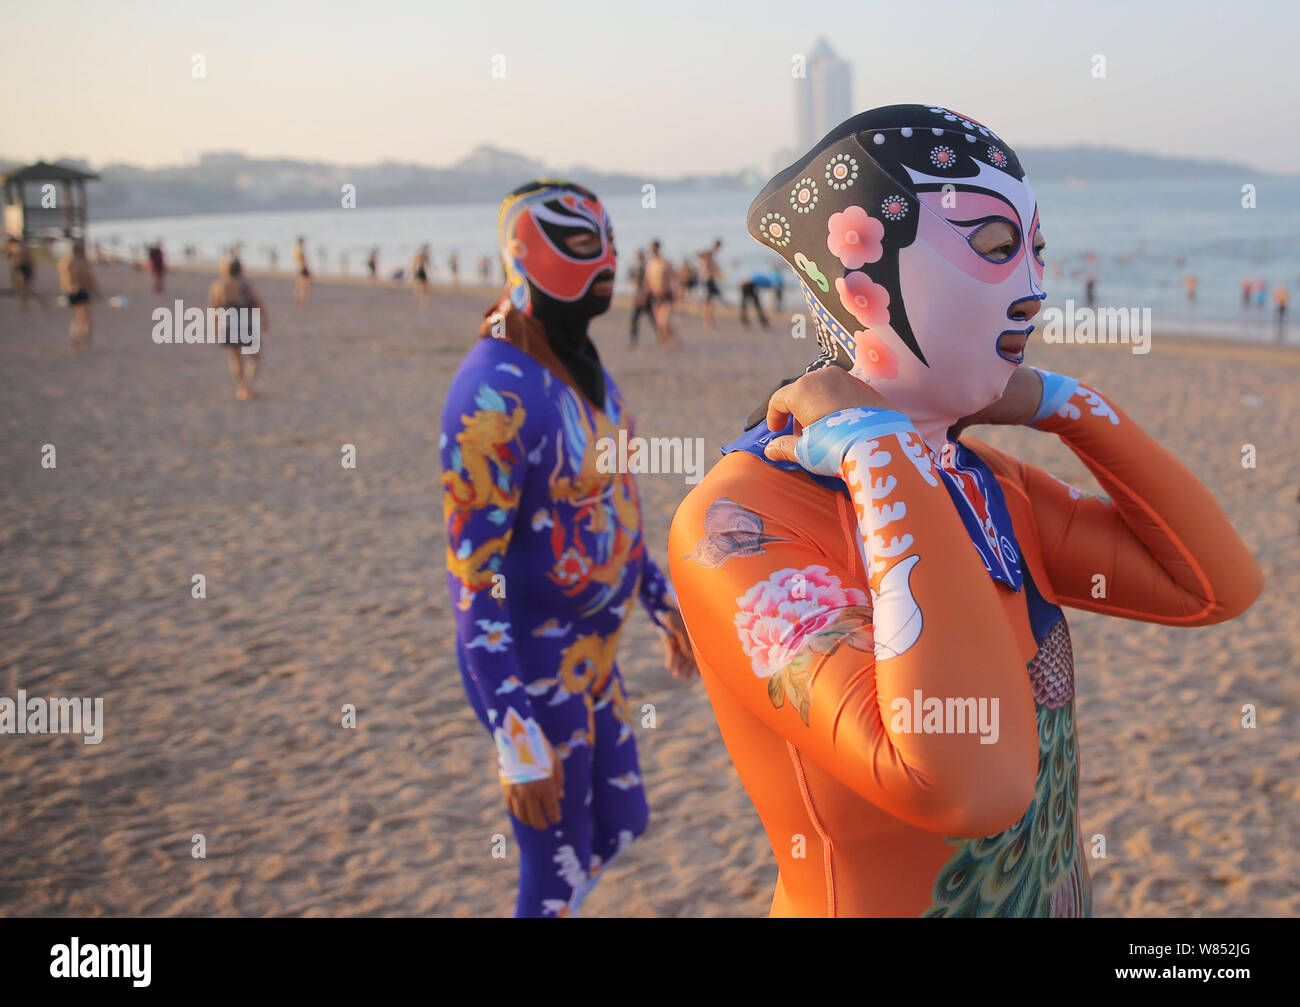 Chinese women wearing facekinis are pictured at a beach resort in